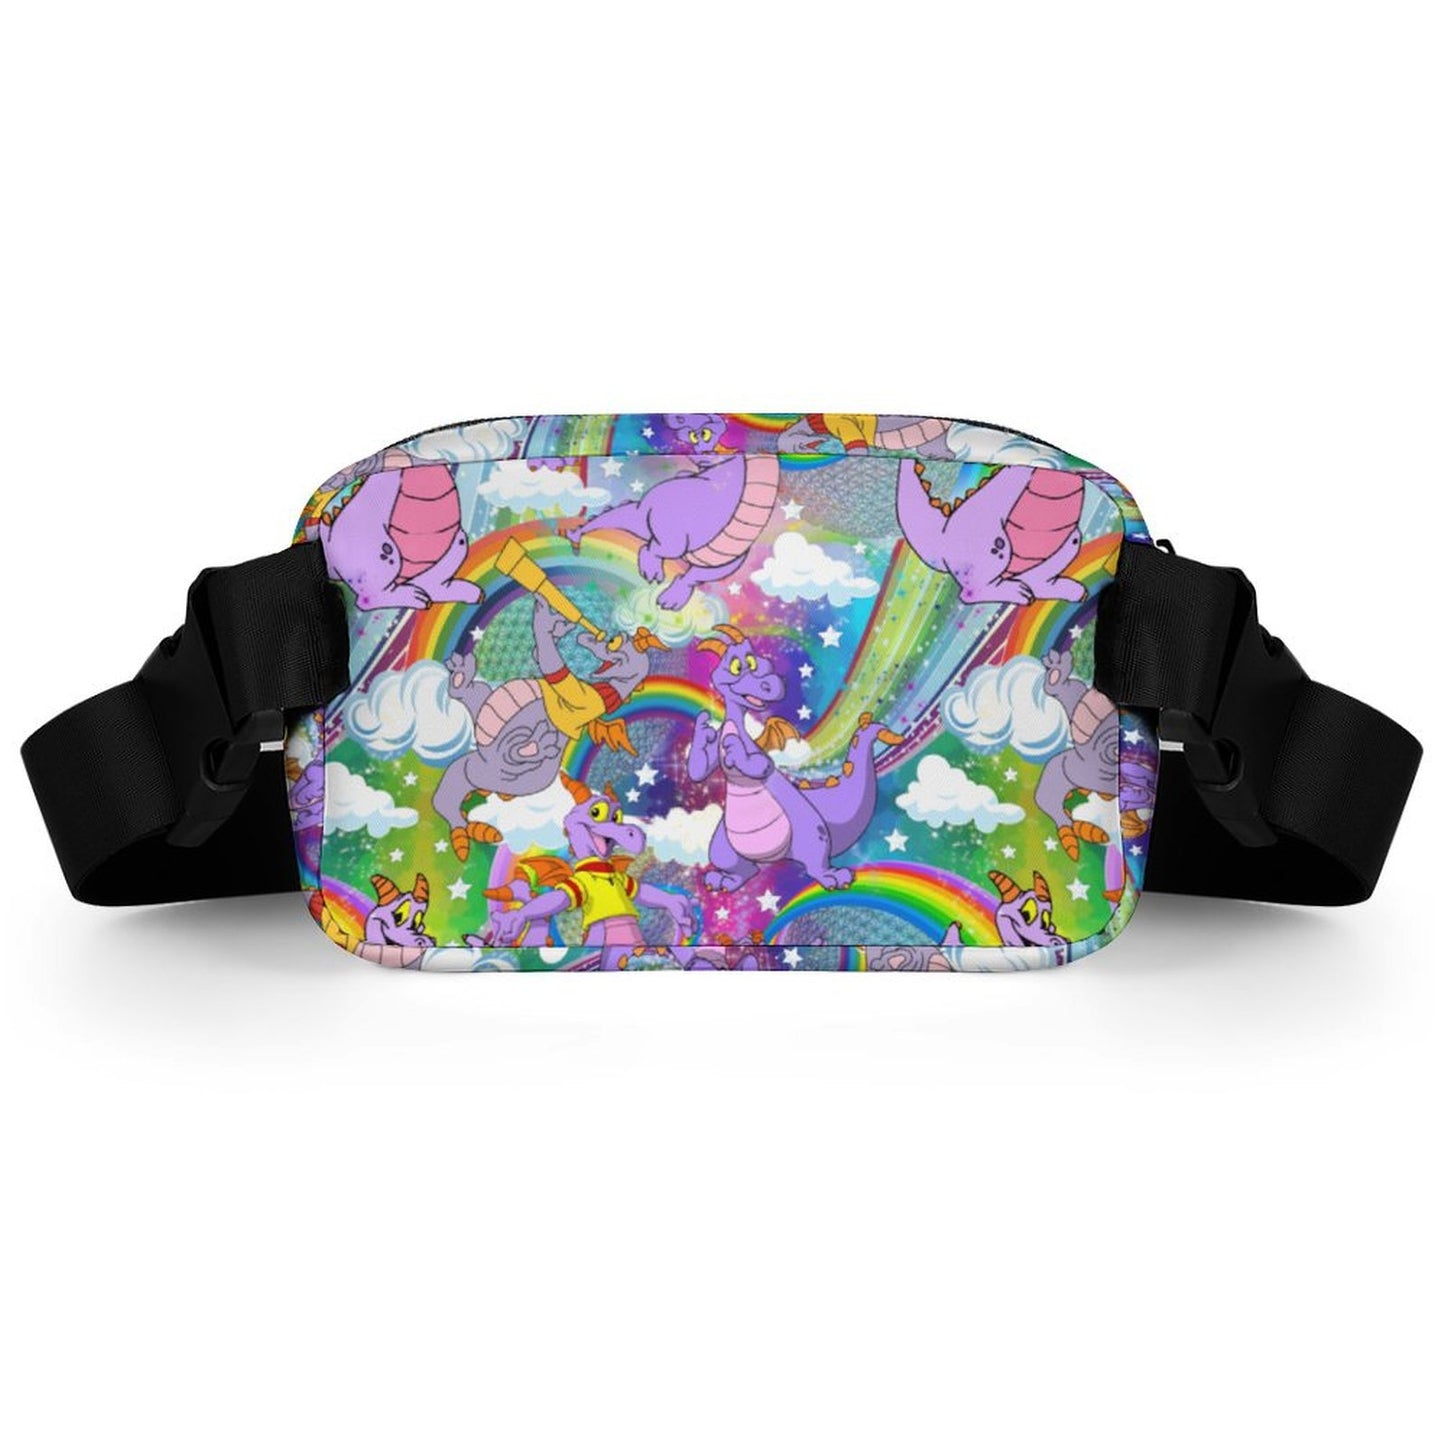 Figgy Fanny Pack- PREORDER - Closing 3/2  - ETA late March